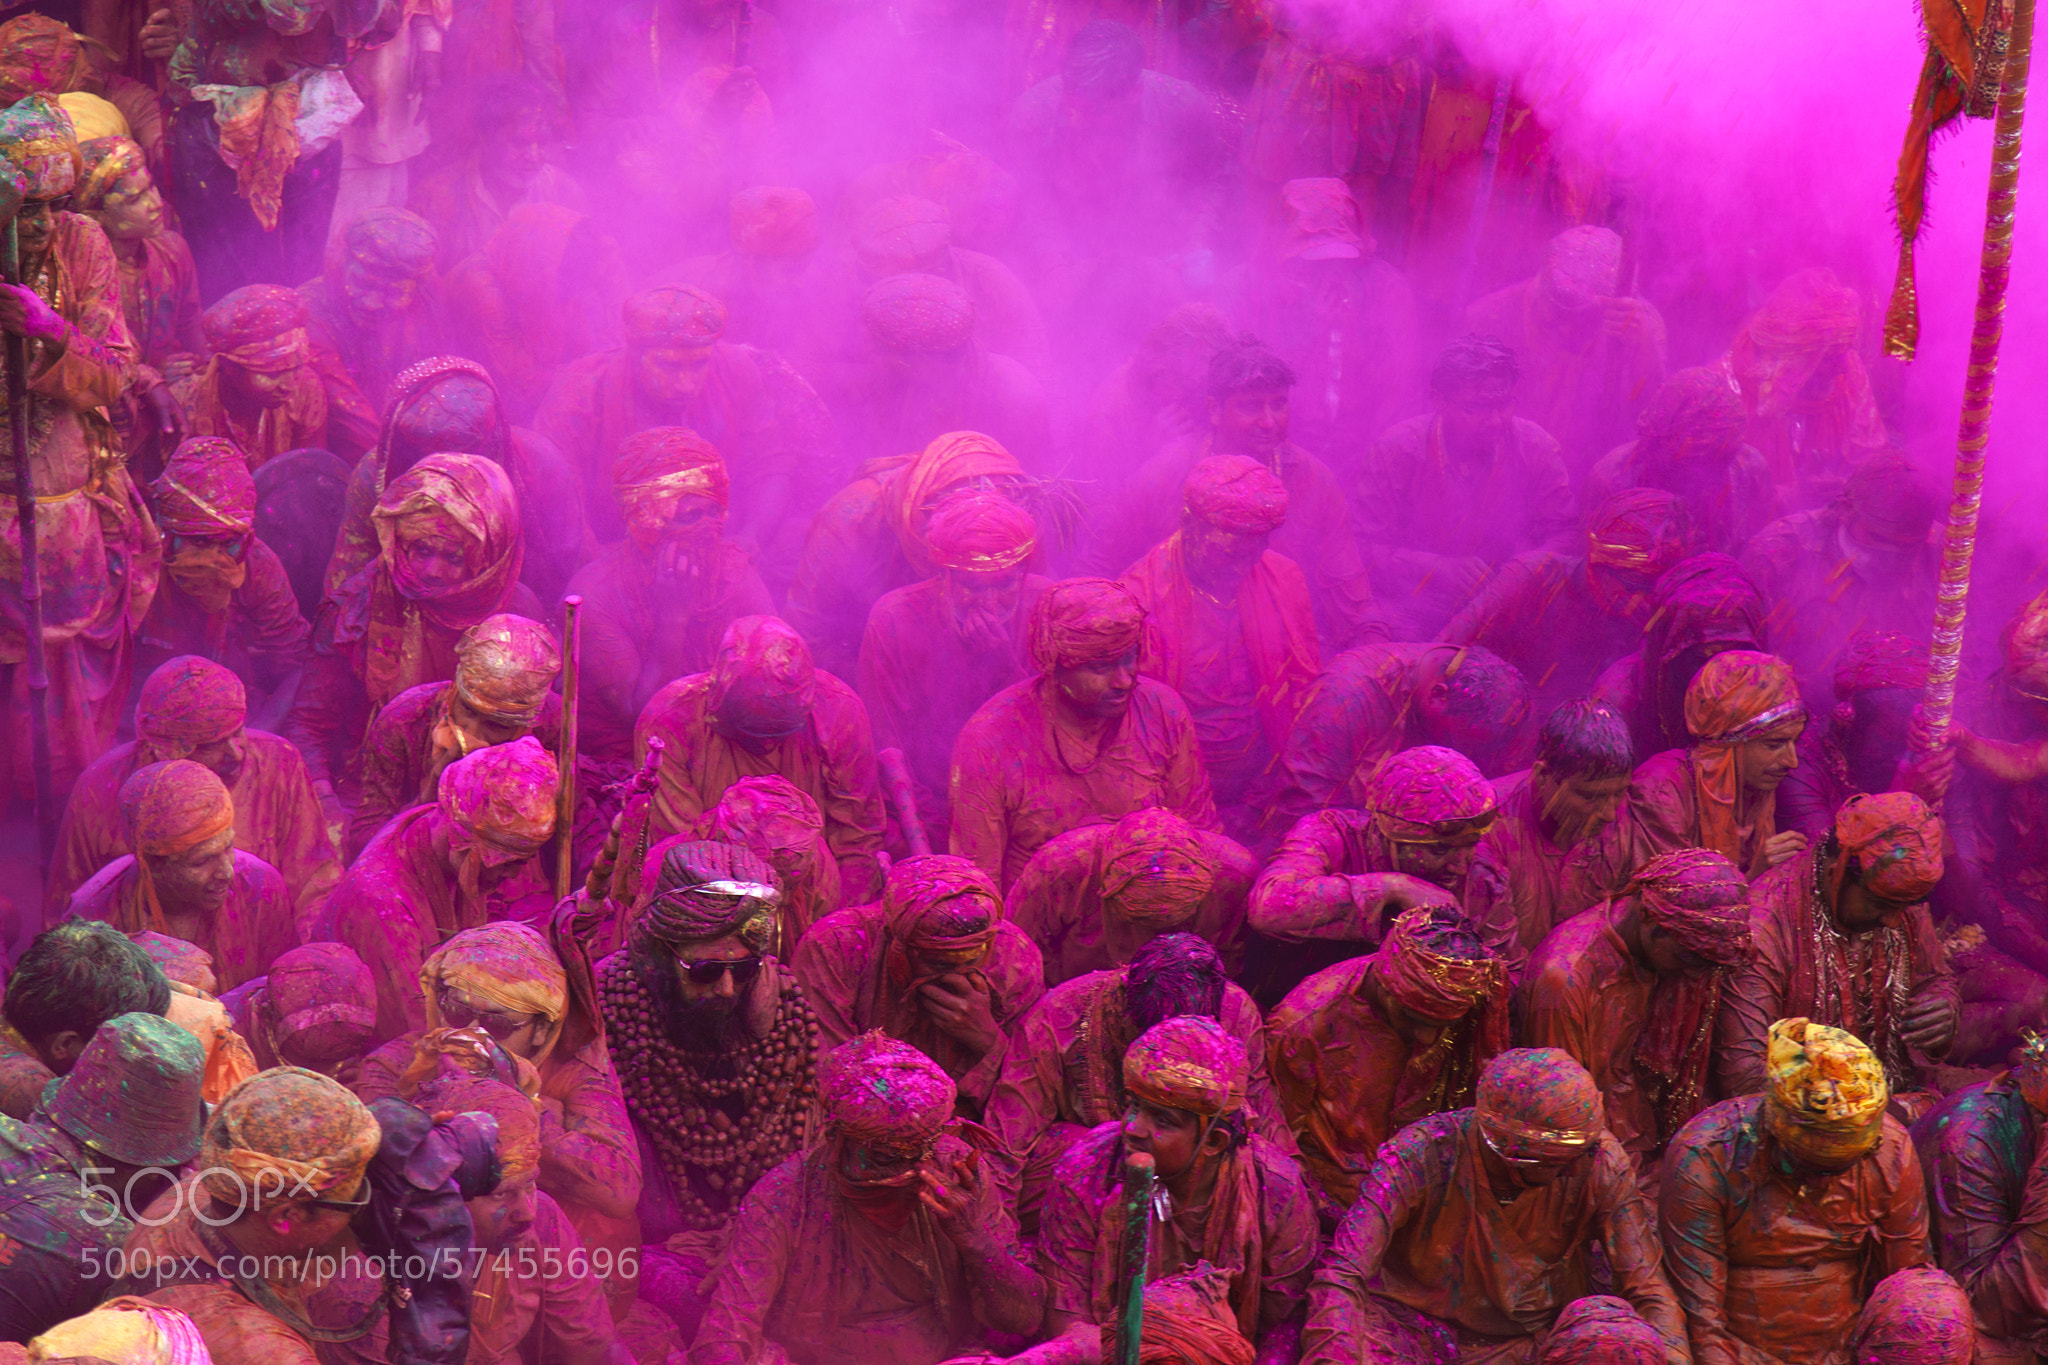 Color in the Air by Jassi Oberai / 500px